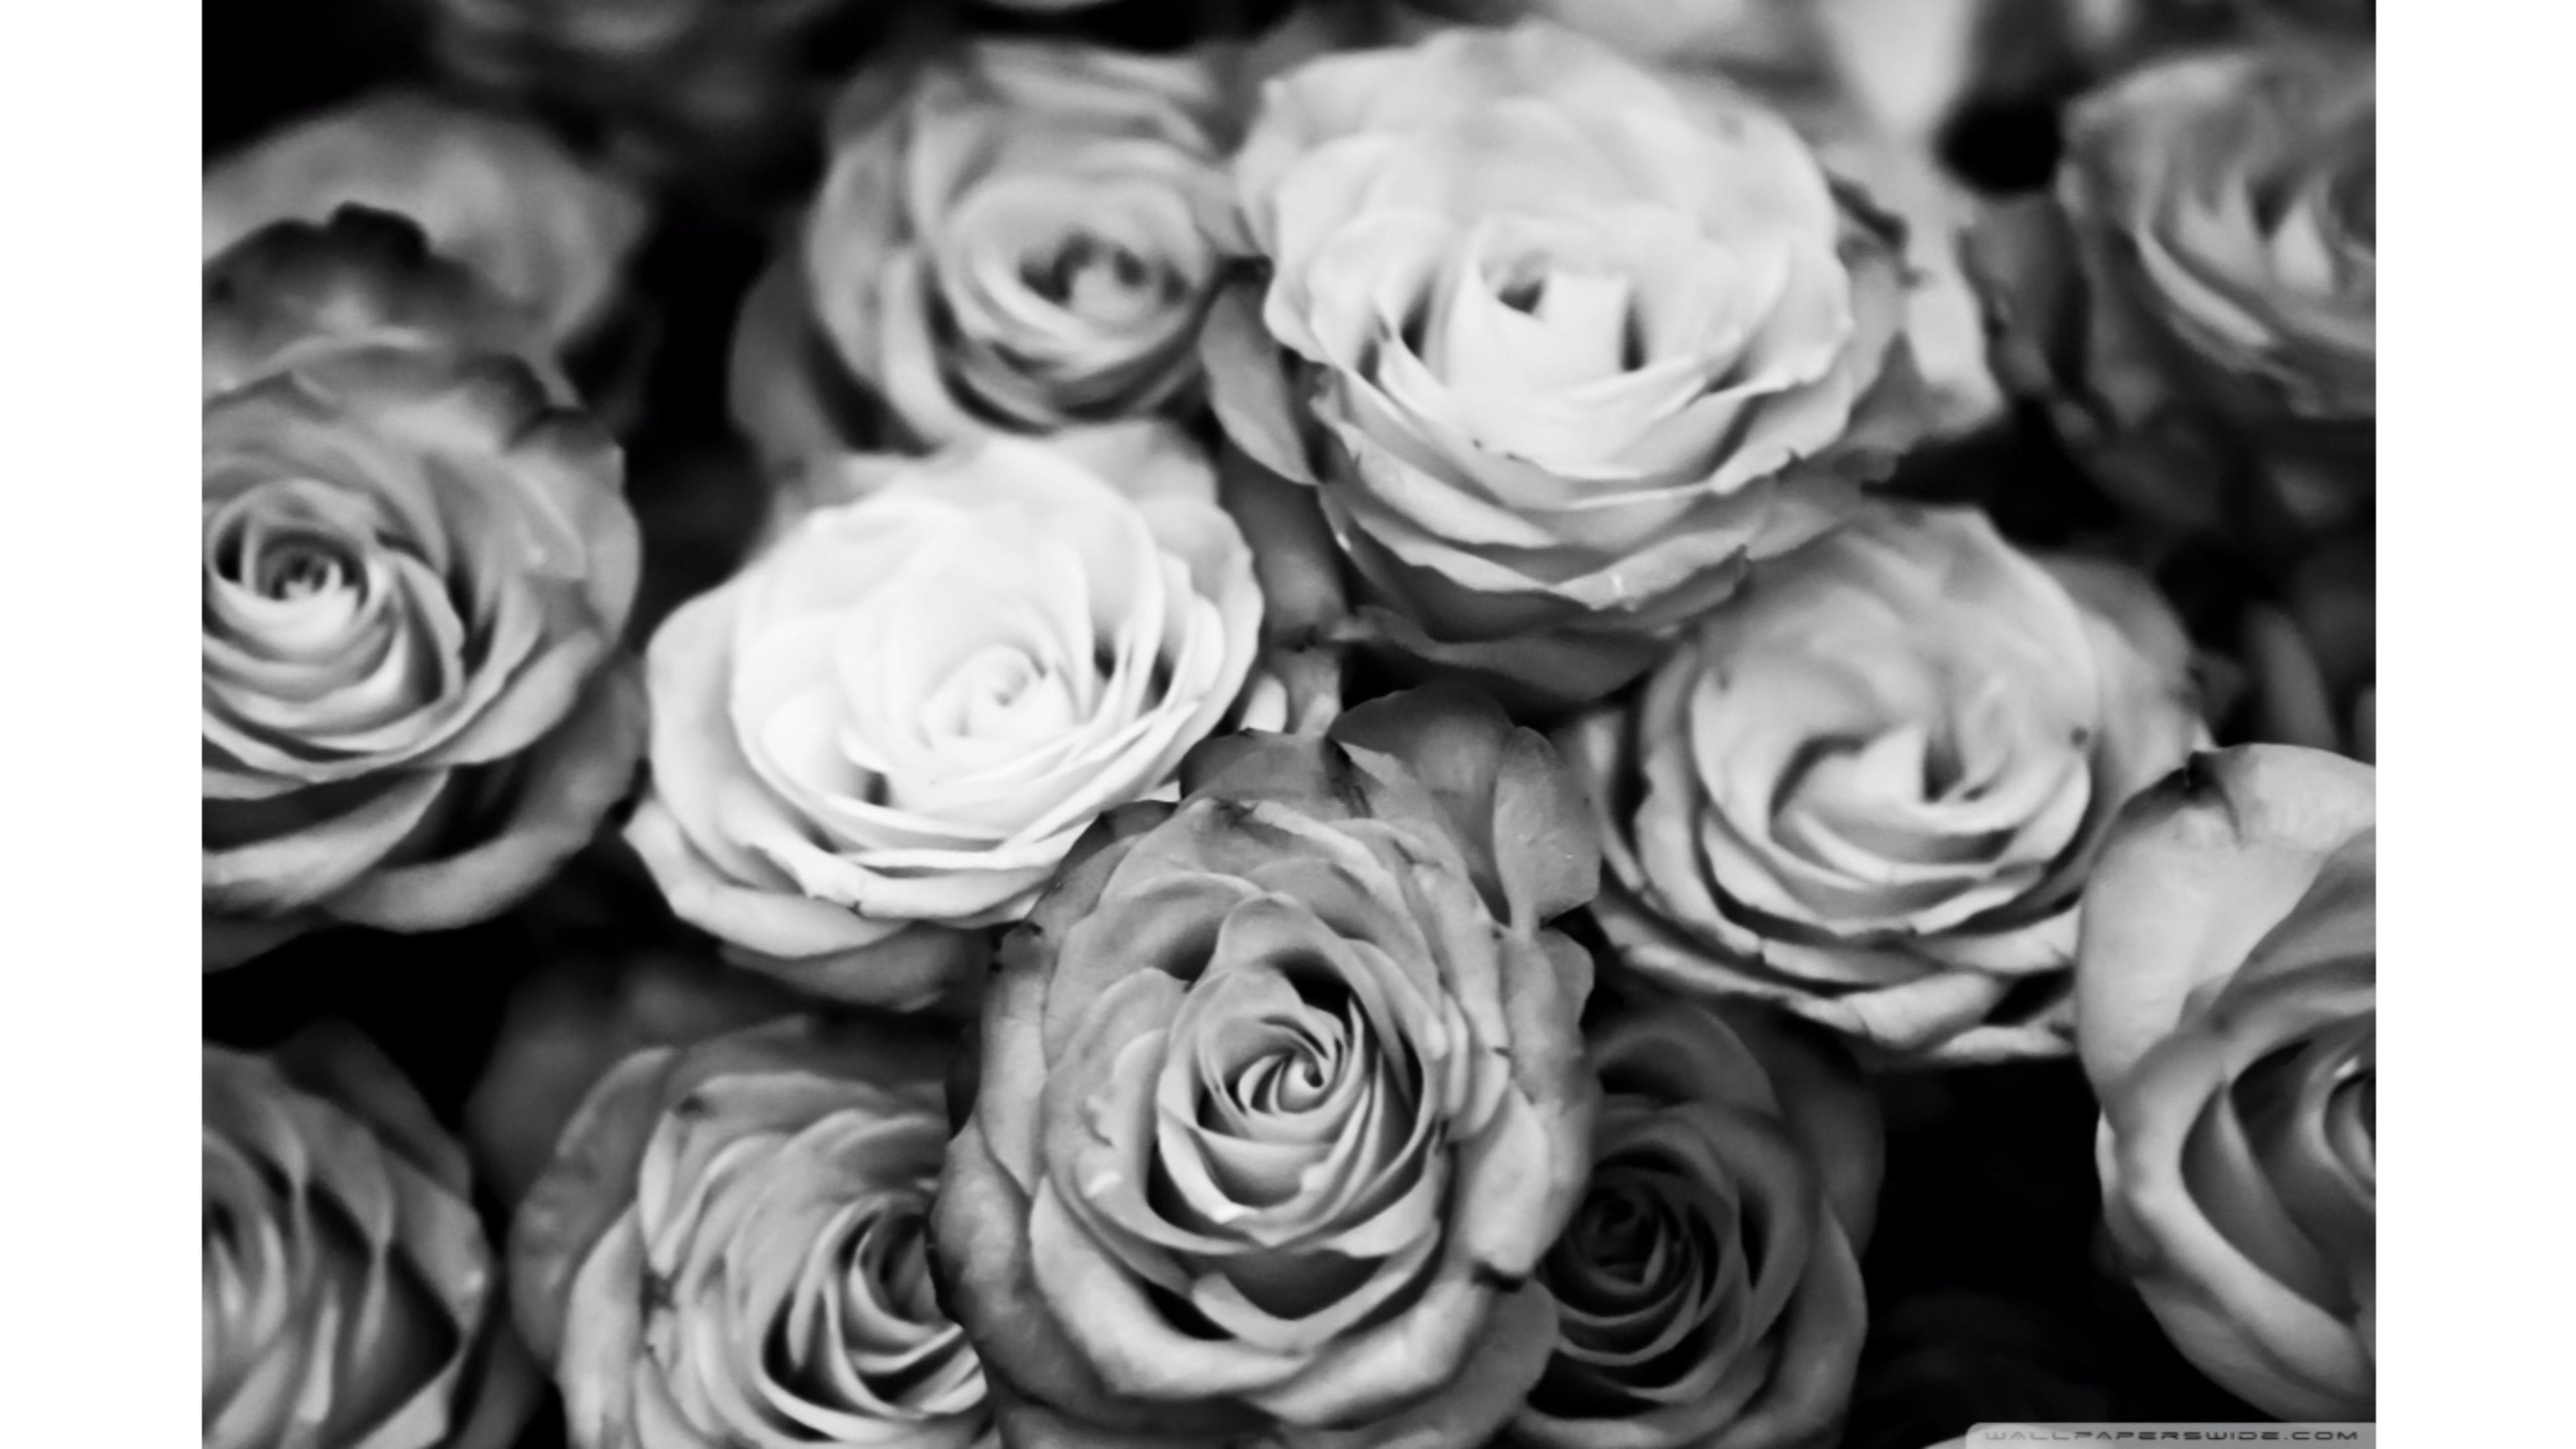 Black And White Rose Wallpaper - Black And White Roses Background - HD Wallpaper 